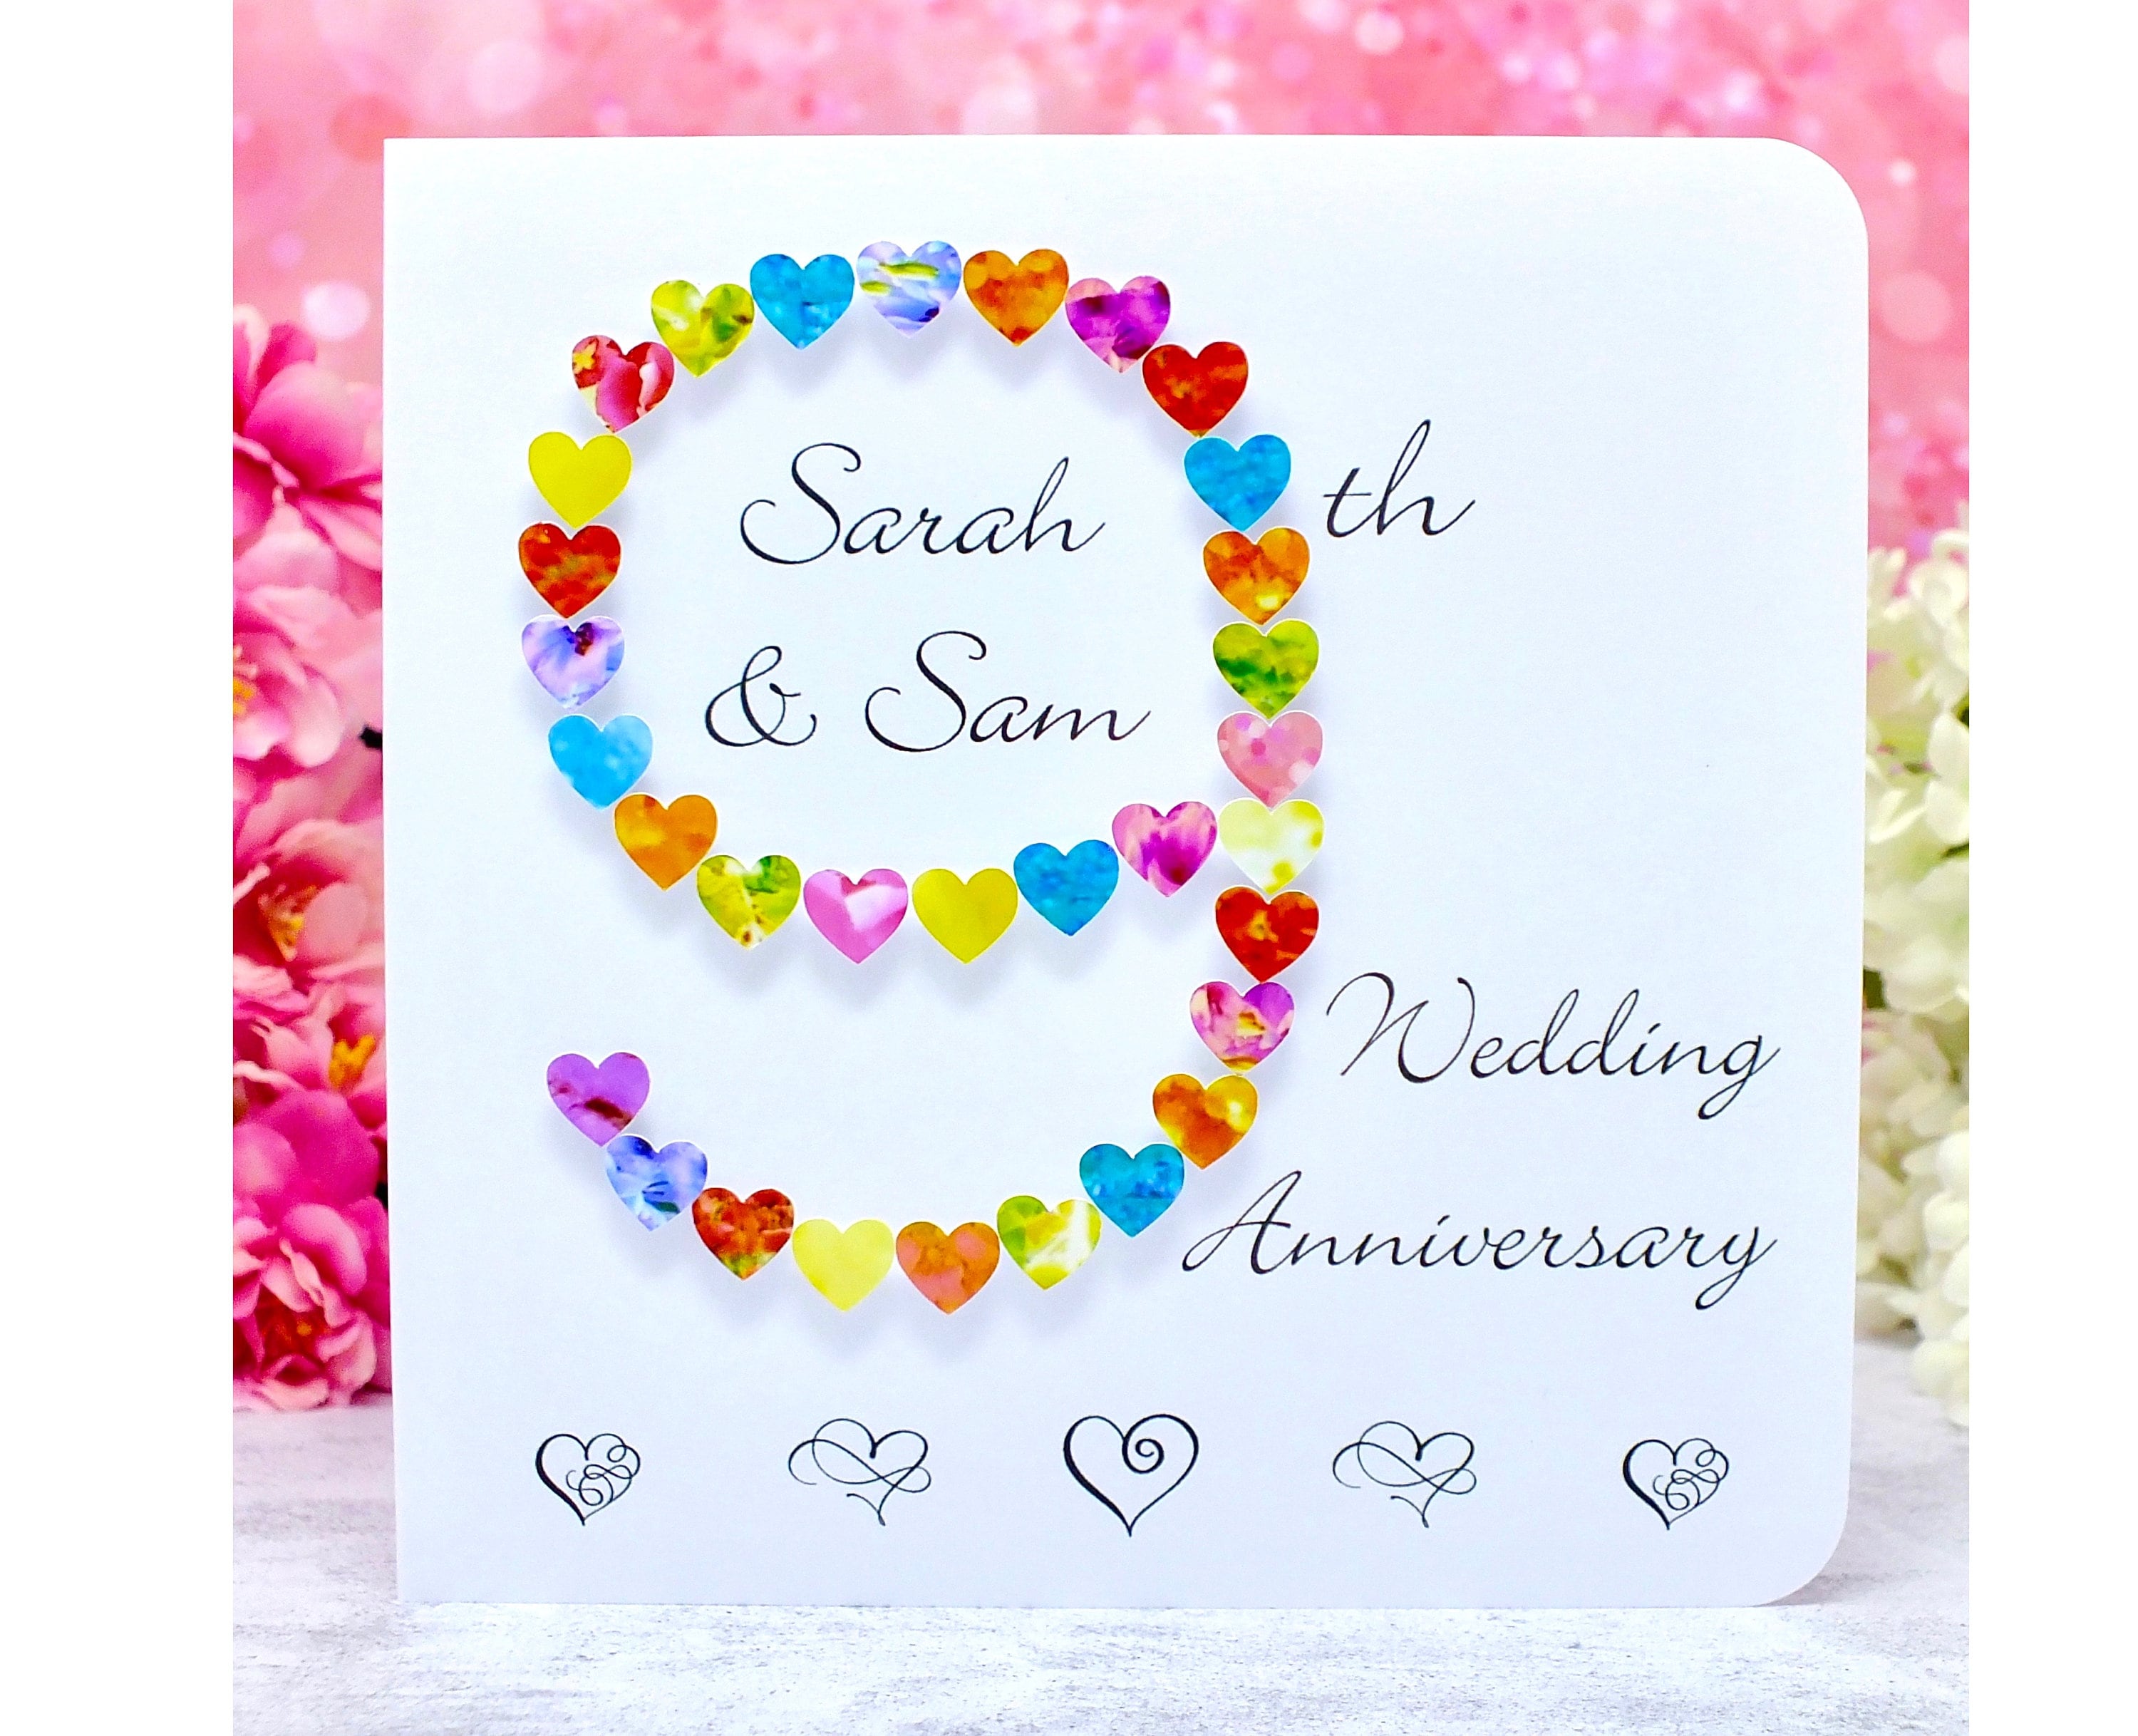 9th Wedding Anniversary Card Handmade and Personalised With hq nude picture